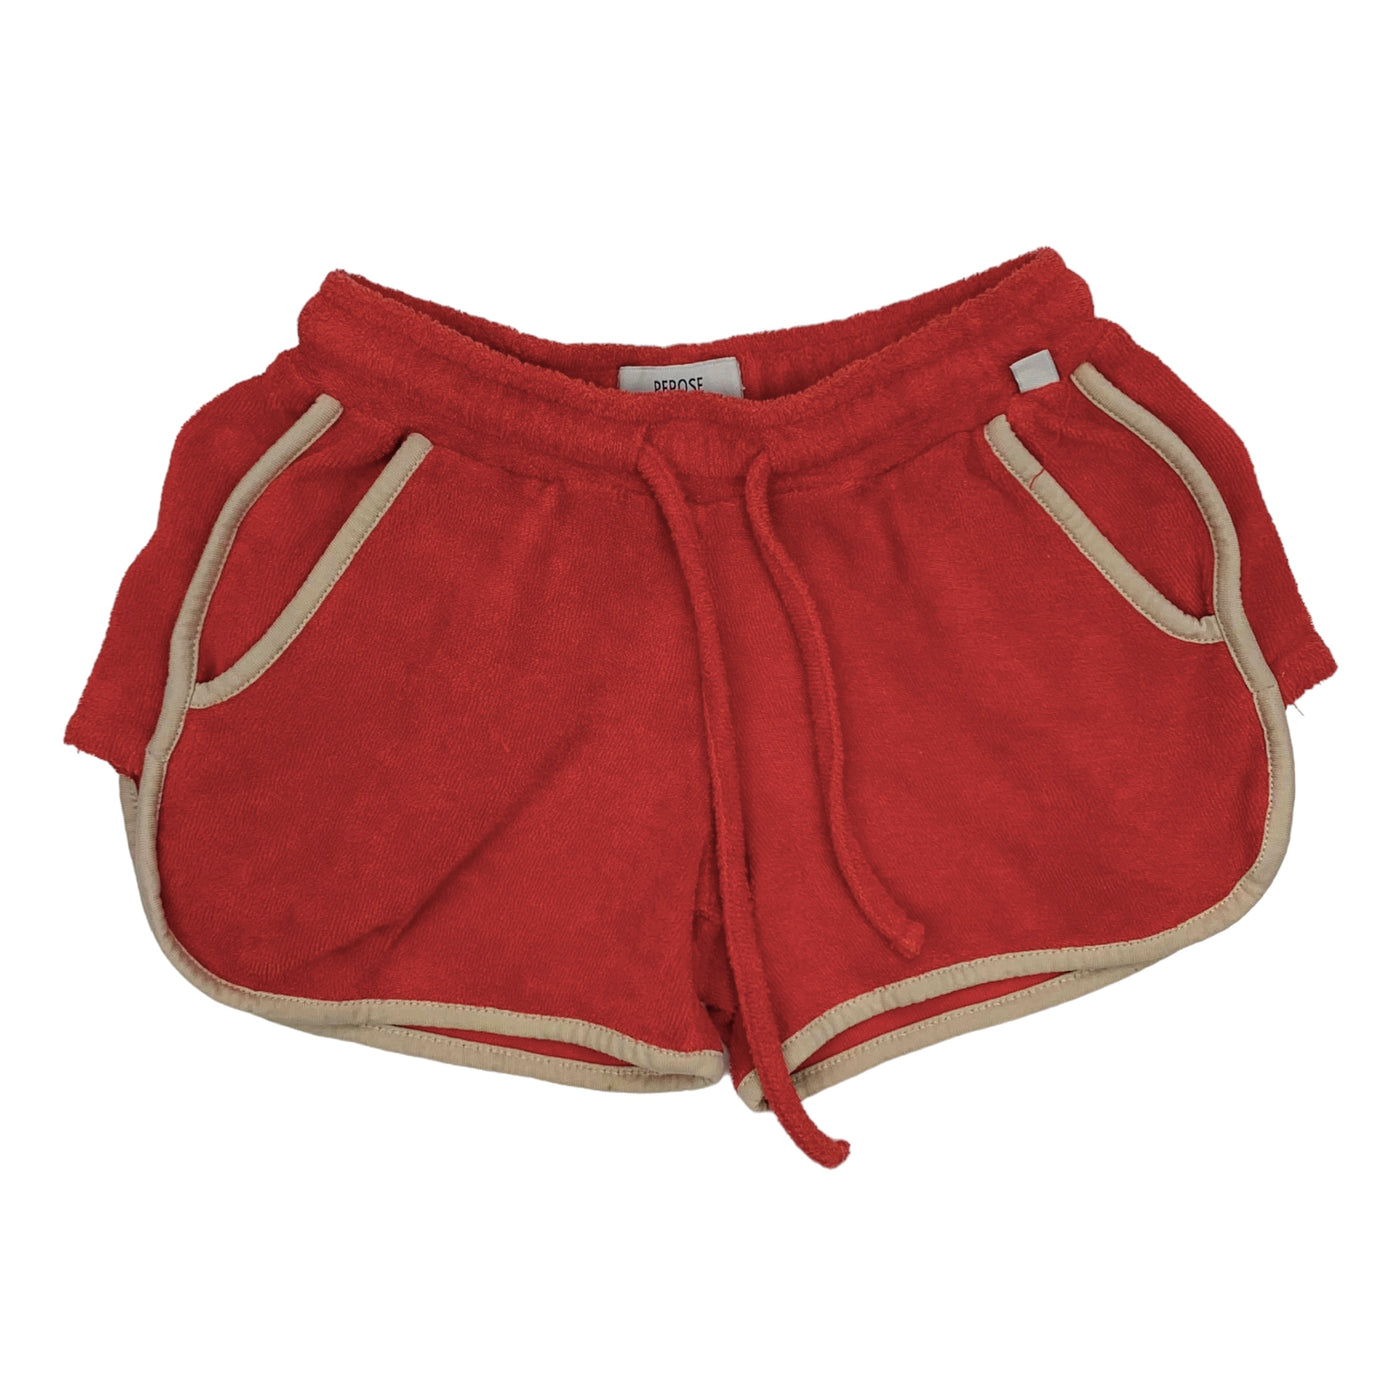 Repose AMS sporty shorts red size 2